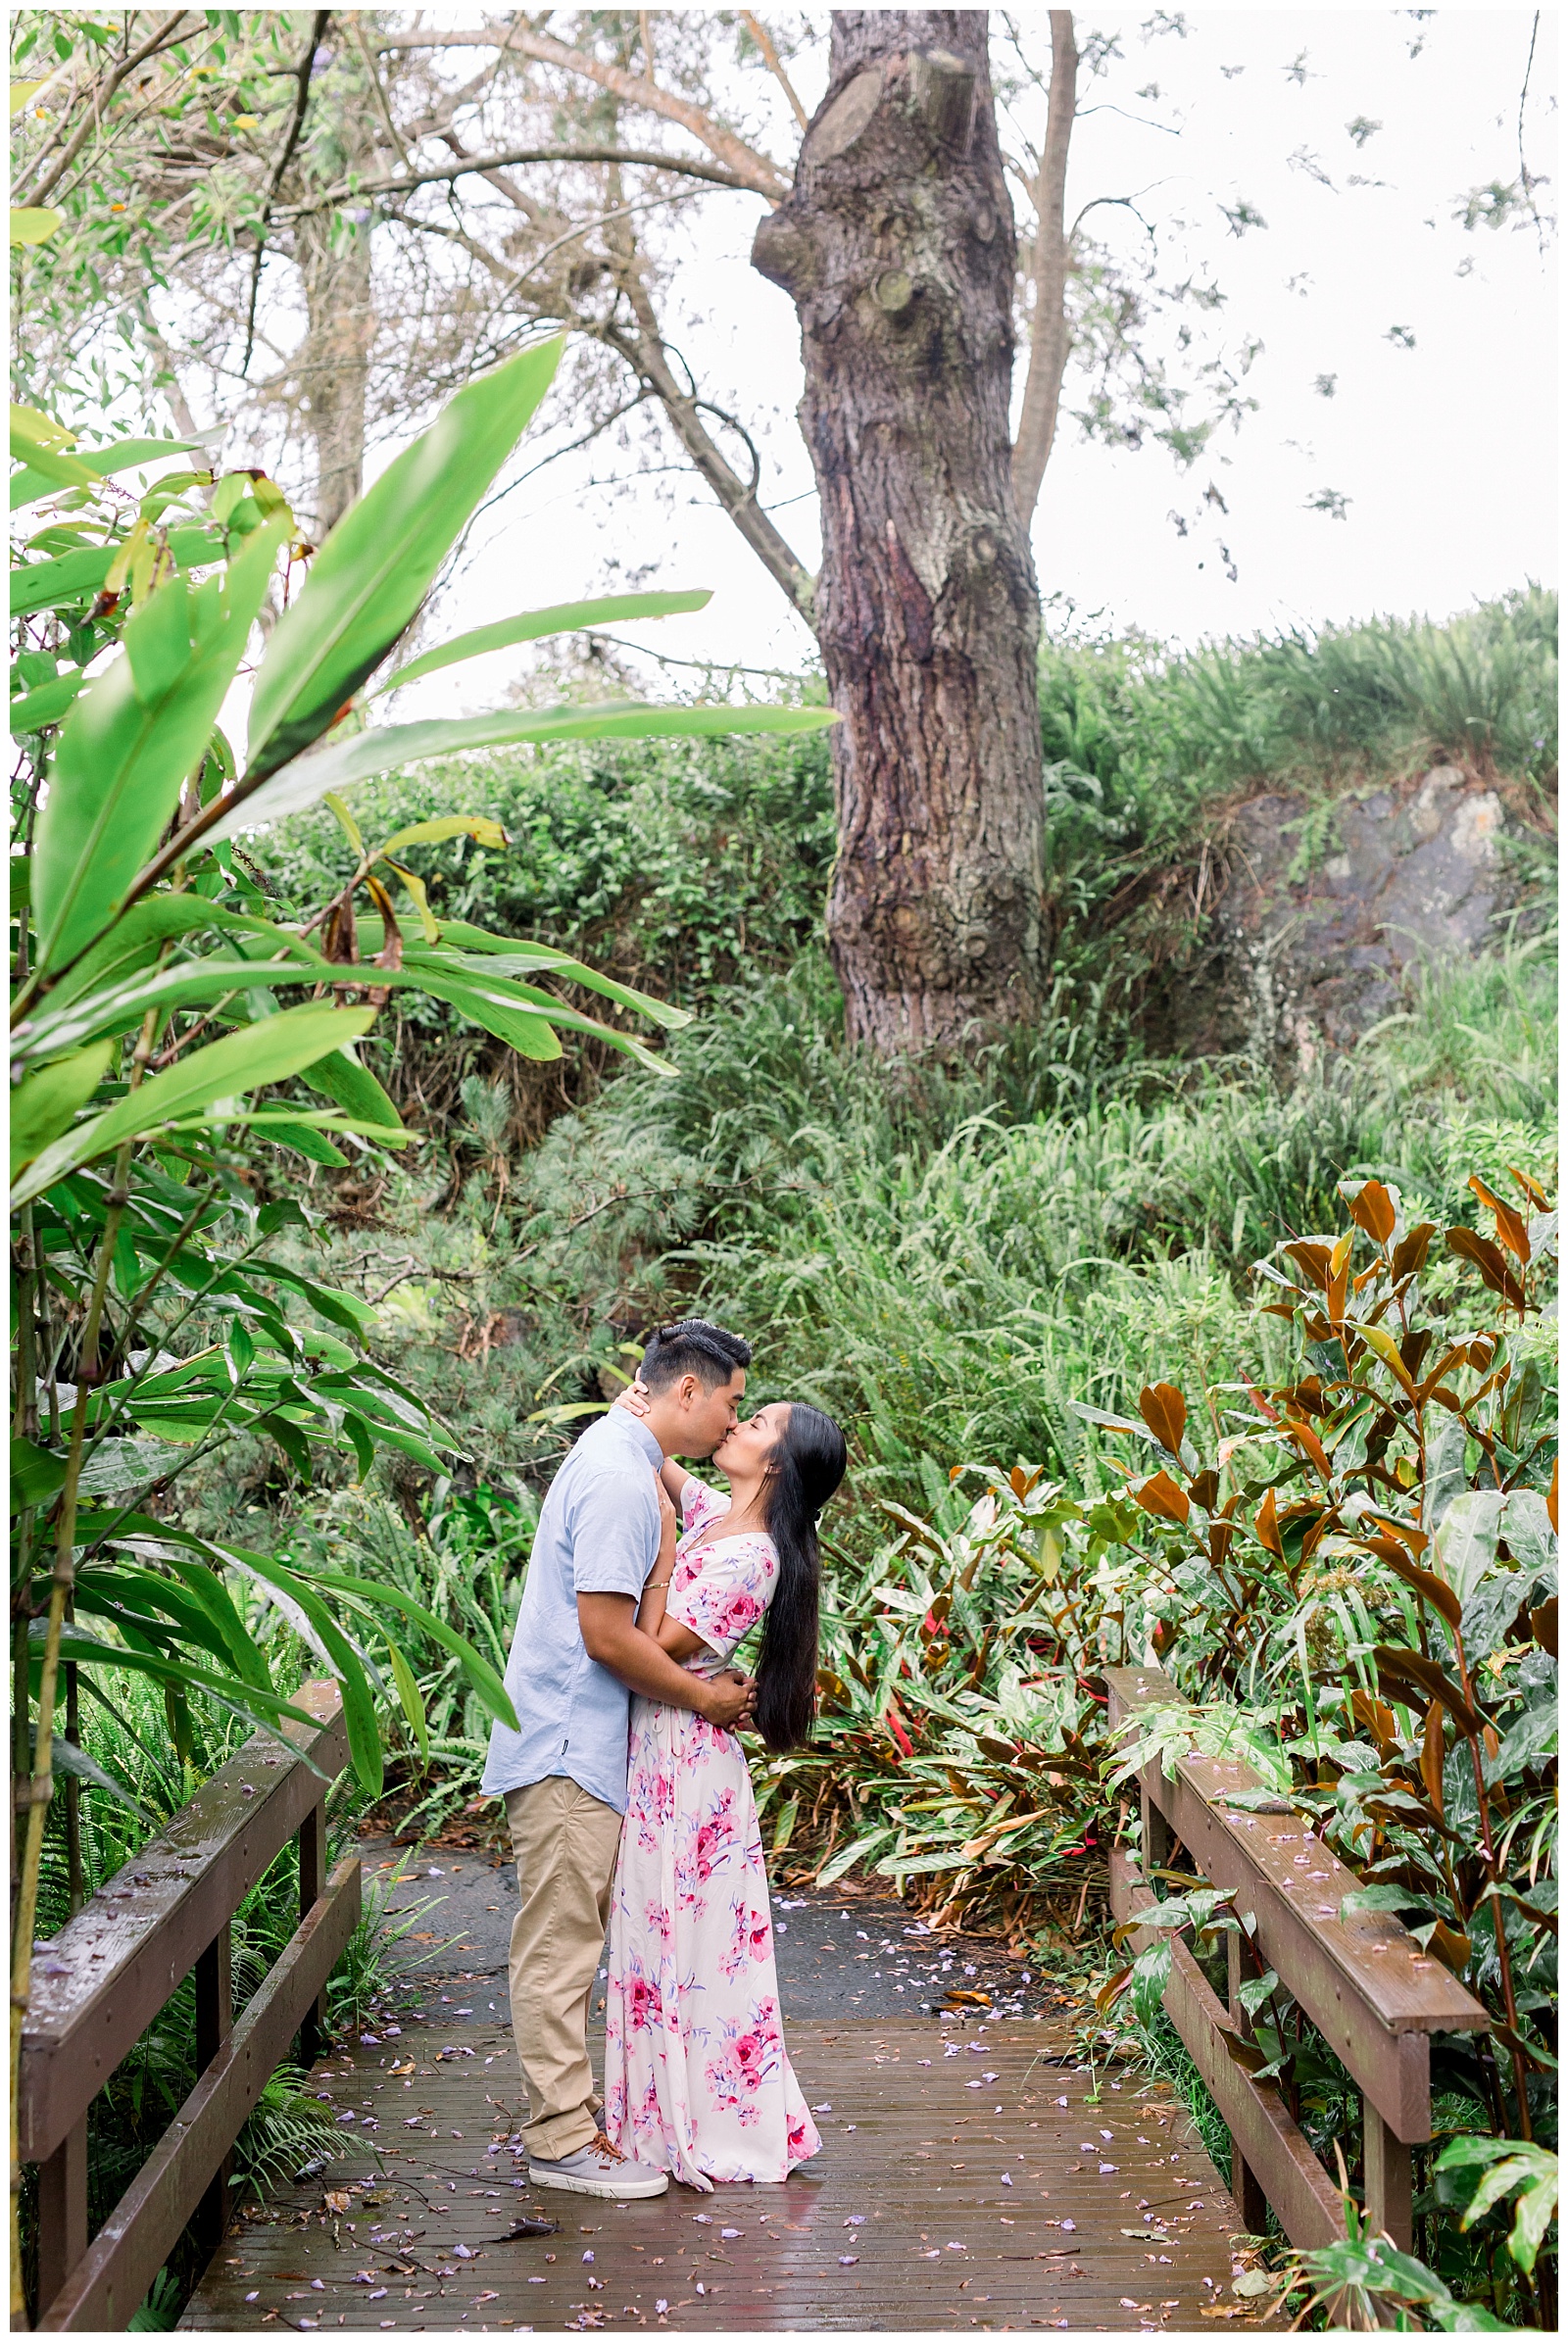 Couple embraces in romantic kiss on bridge surrounded by botanical gardens in Maui Hawaii Engagement-Kula Botanical Gardens Engagement - Ali'i Kula Lavendar Farm Engagement | Maui Hawaii and Destination, Engagement, Elopement and Wedding Photographer Monica Roberts Photography | www.monicaroberts.com